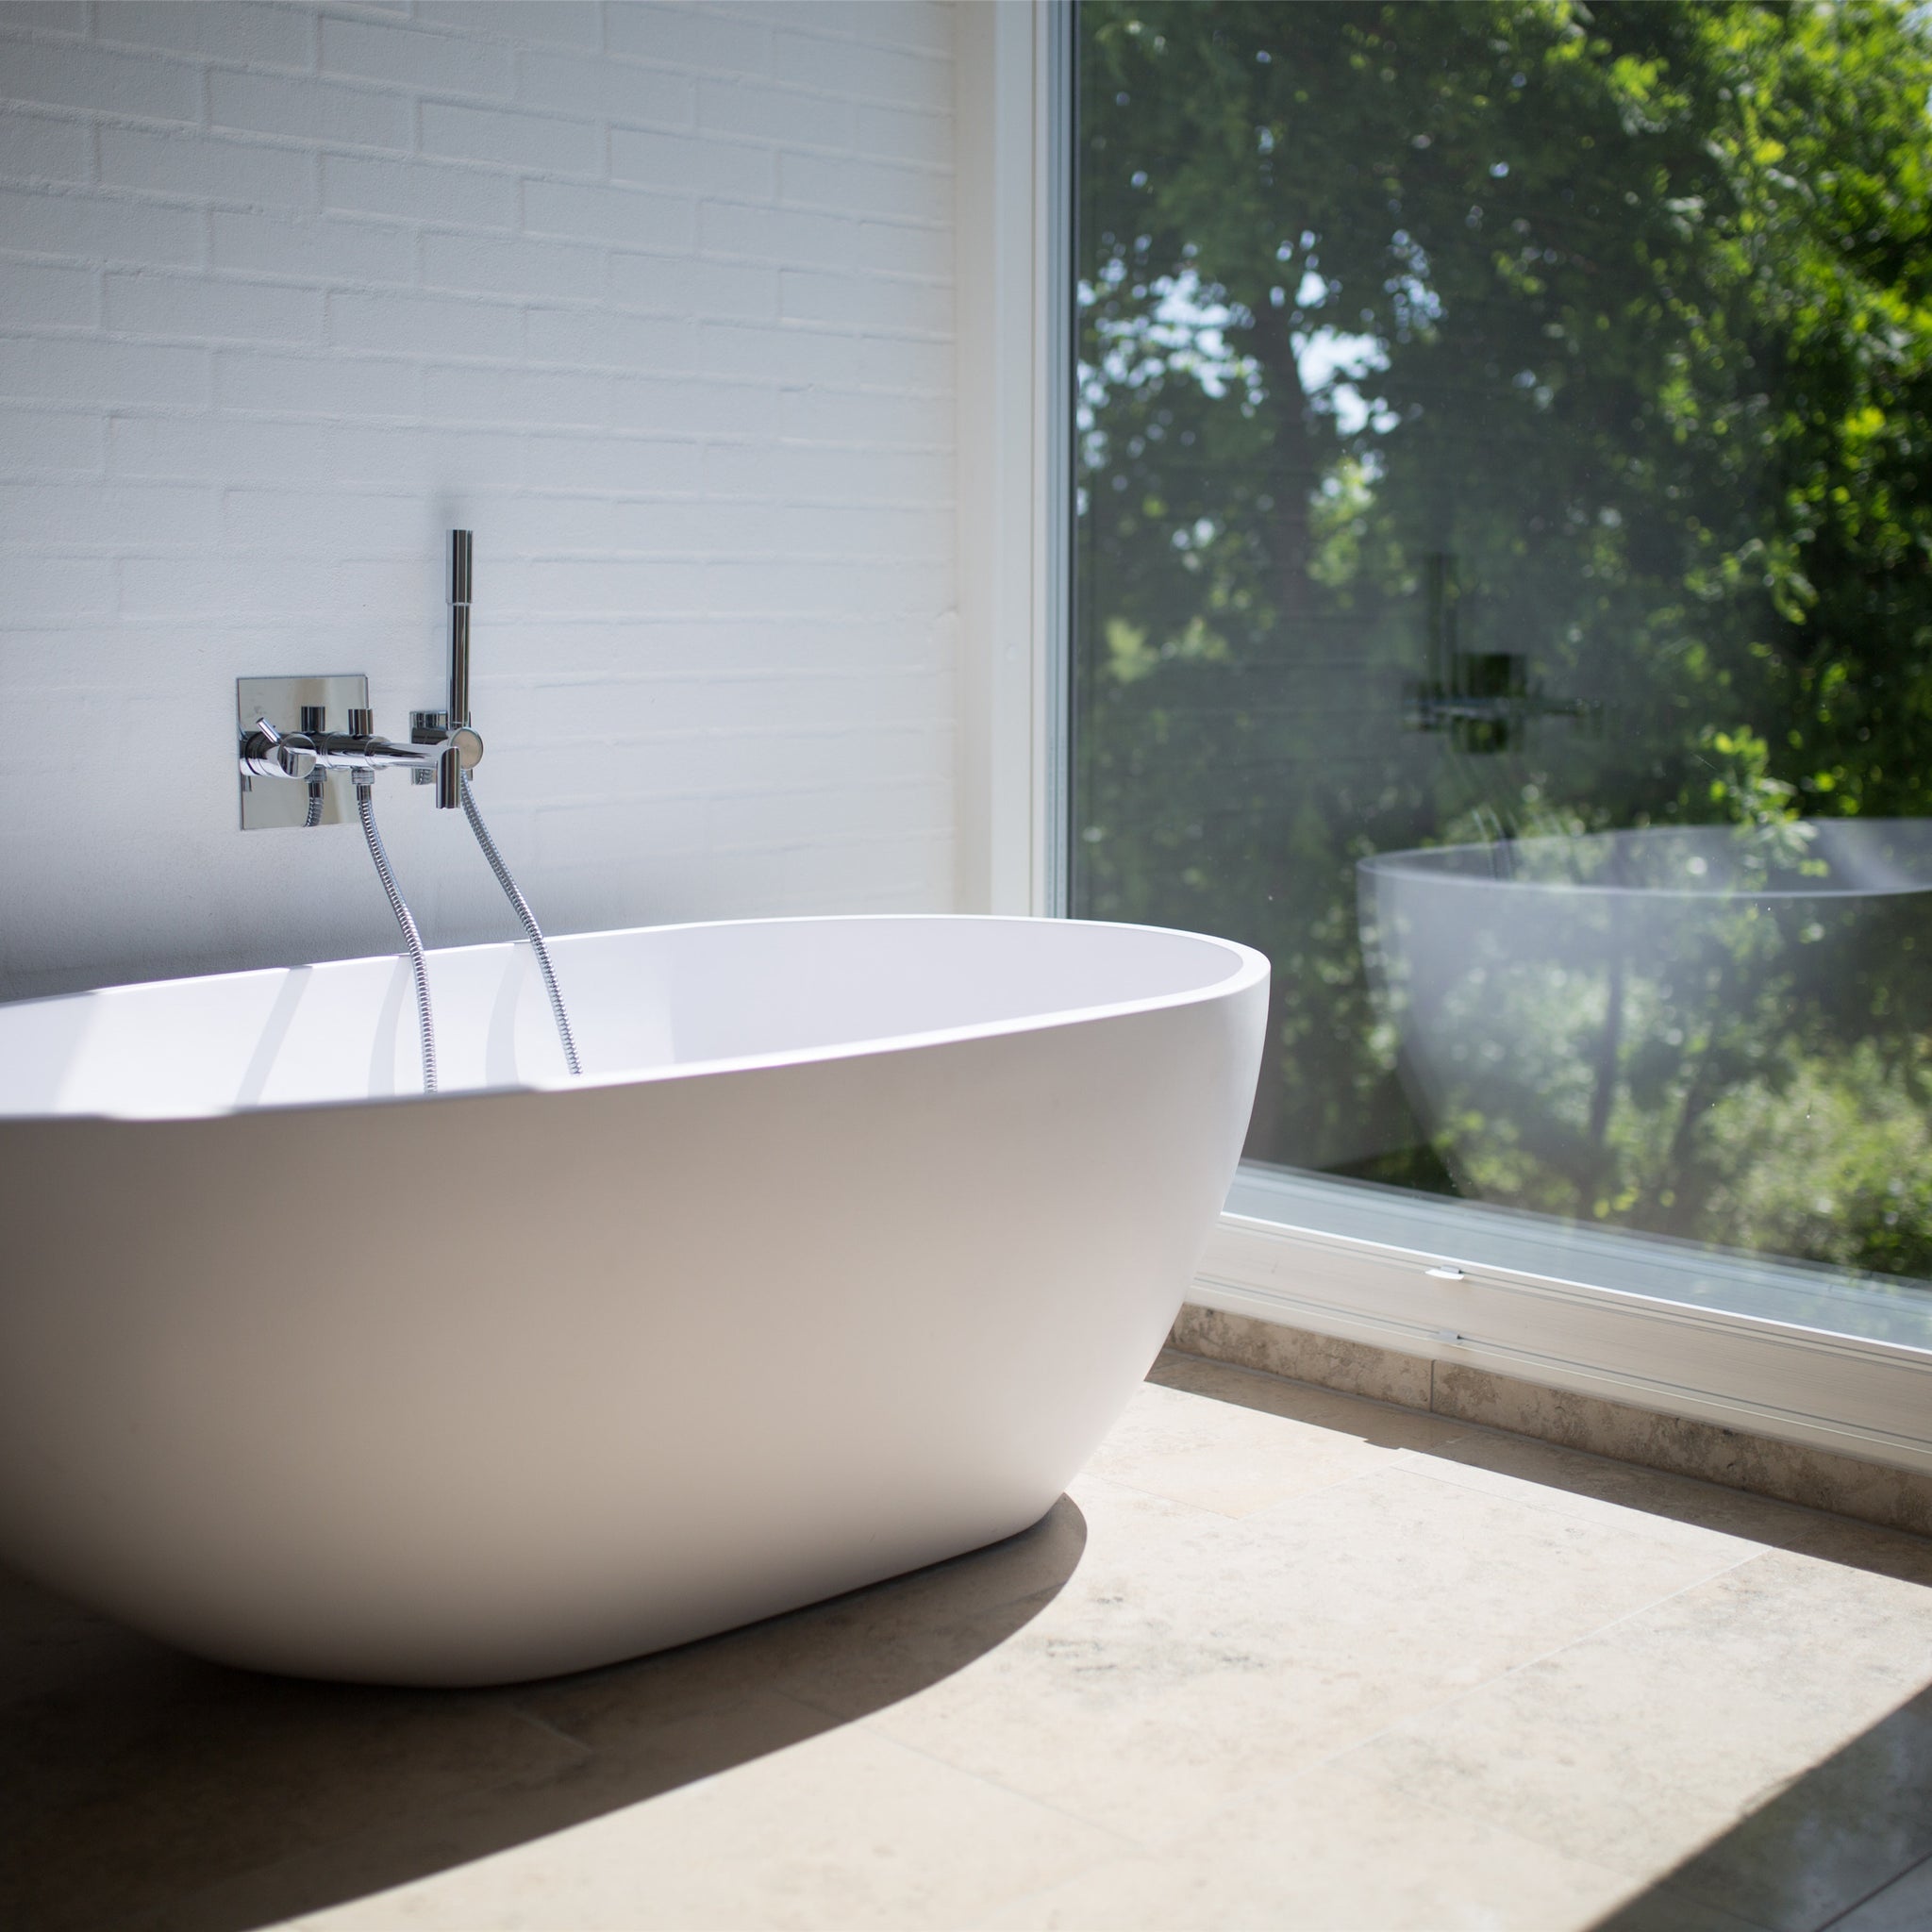 Replace your Old Bathtub with a Designer One